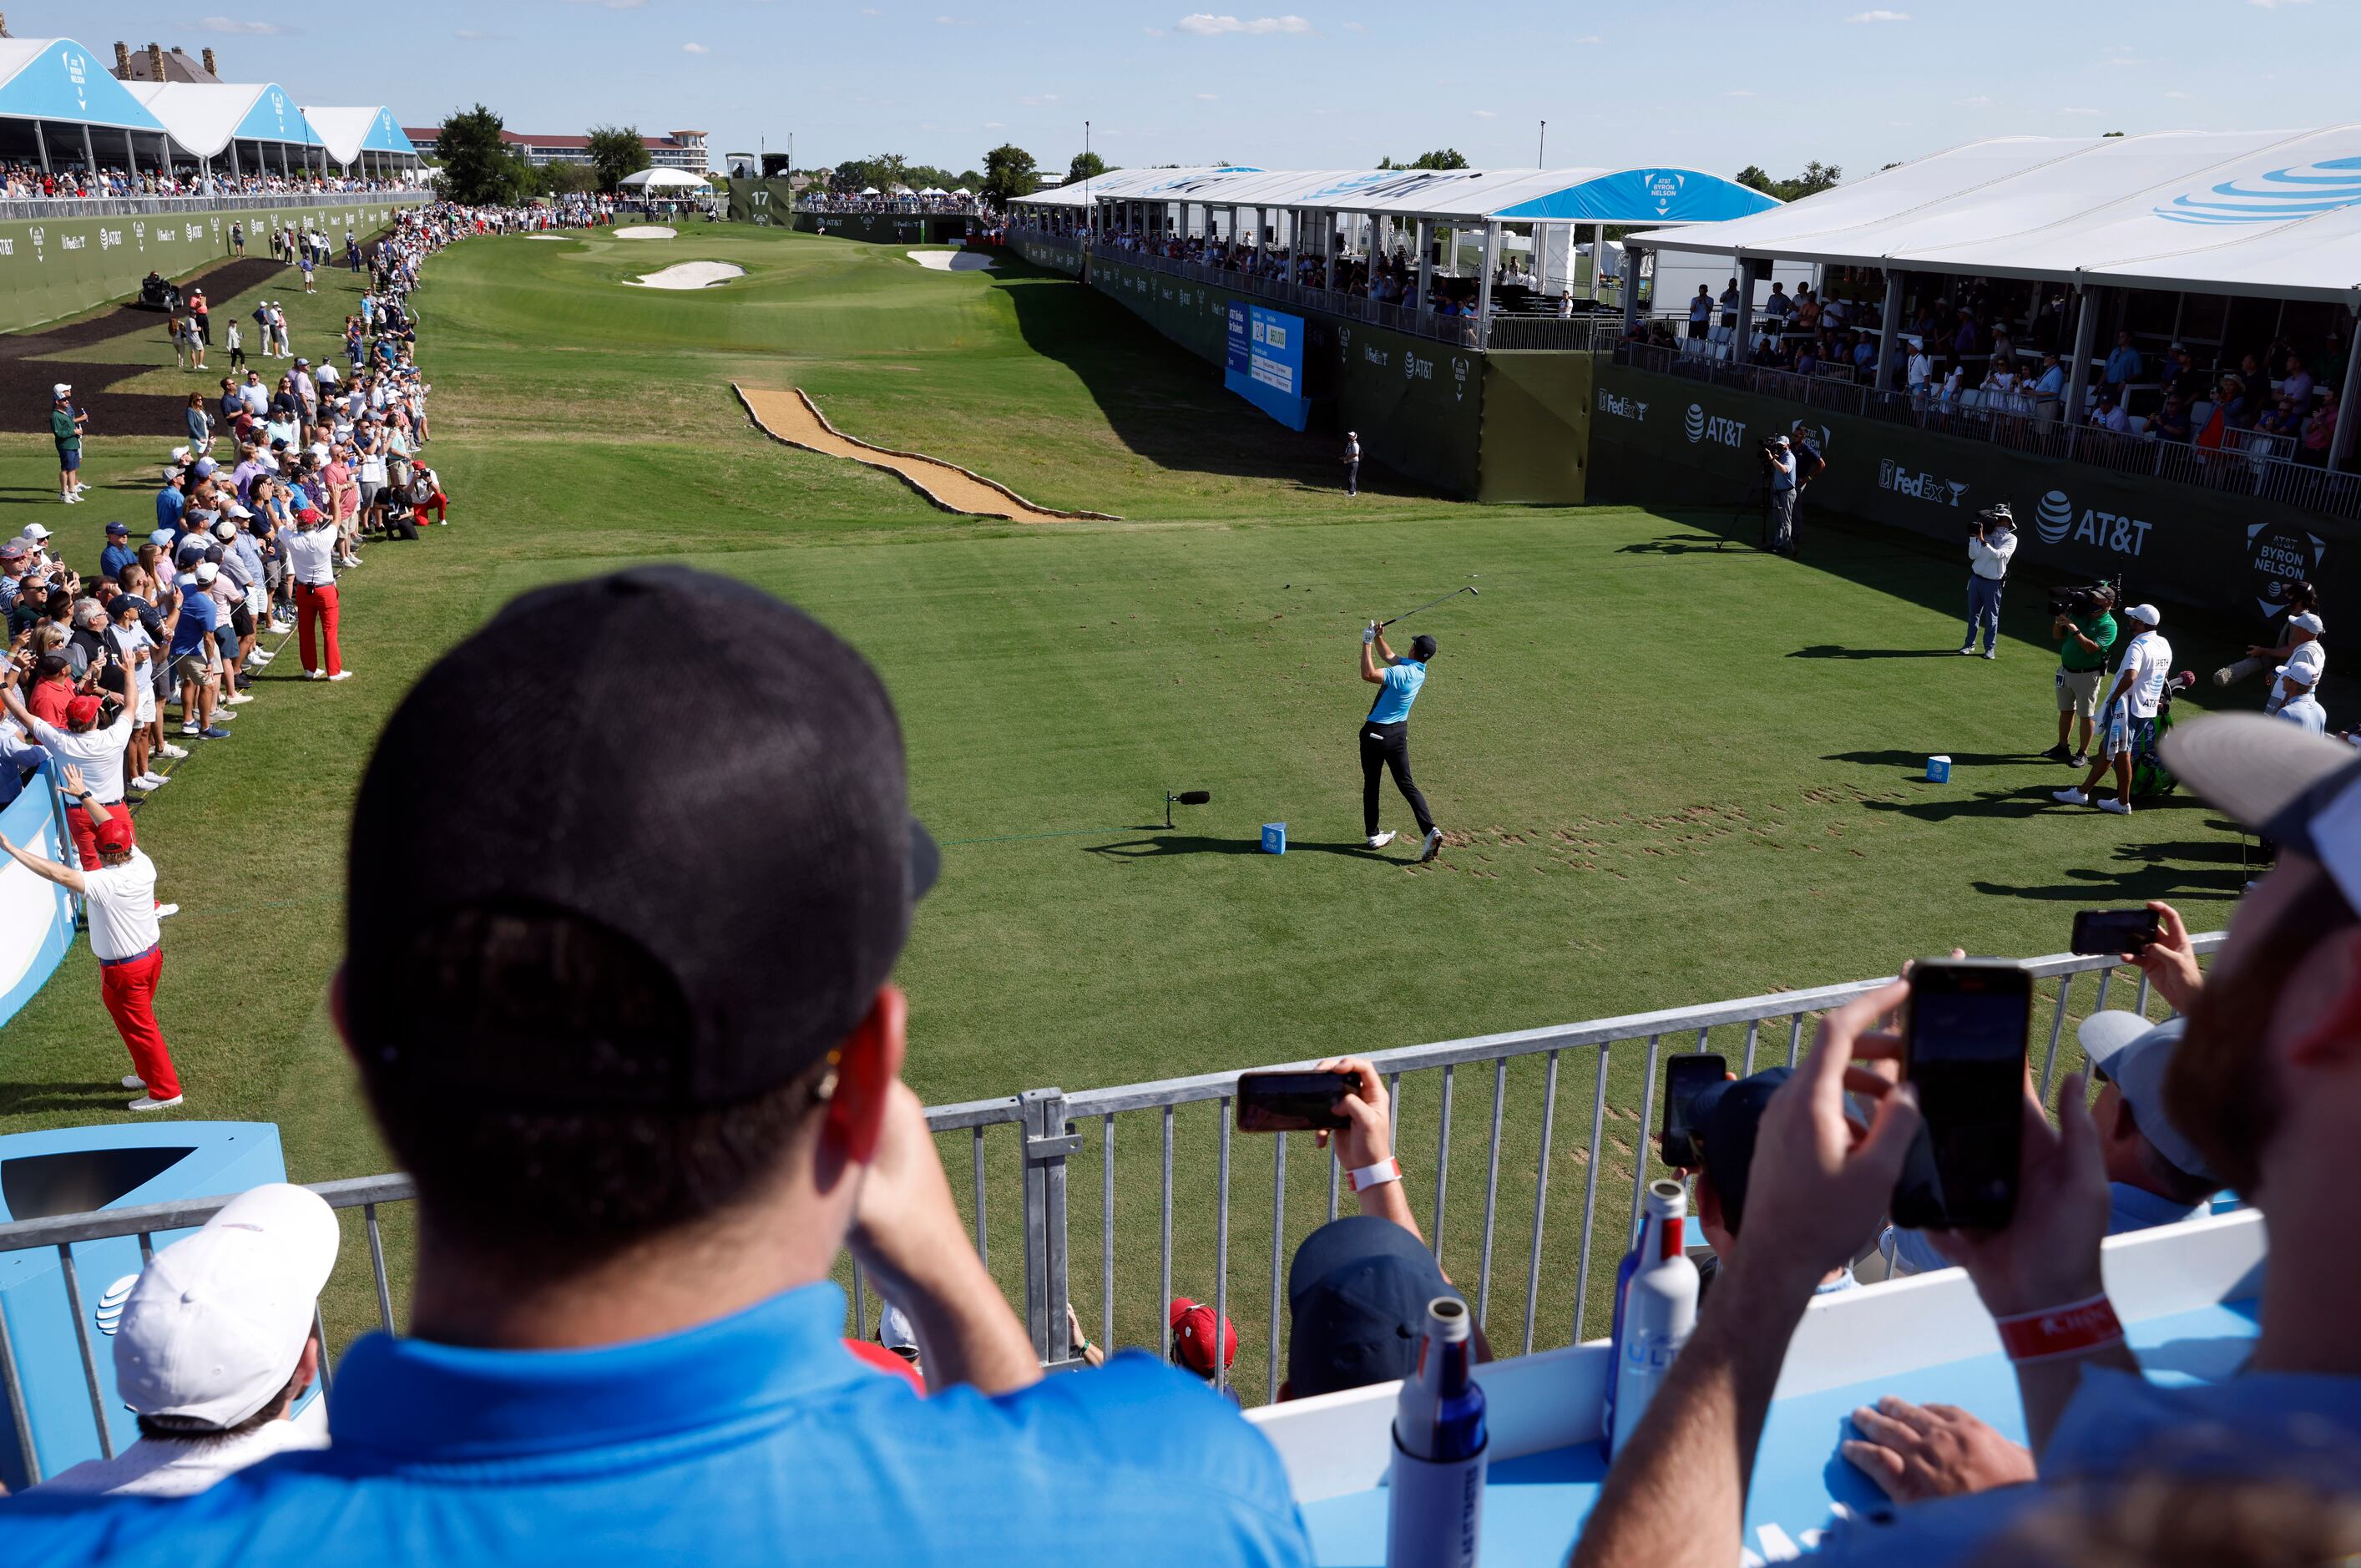 Fans watch as Jordan Spieth tees off on the 17th hole during round 1 of the AT&T Byron...